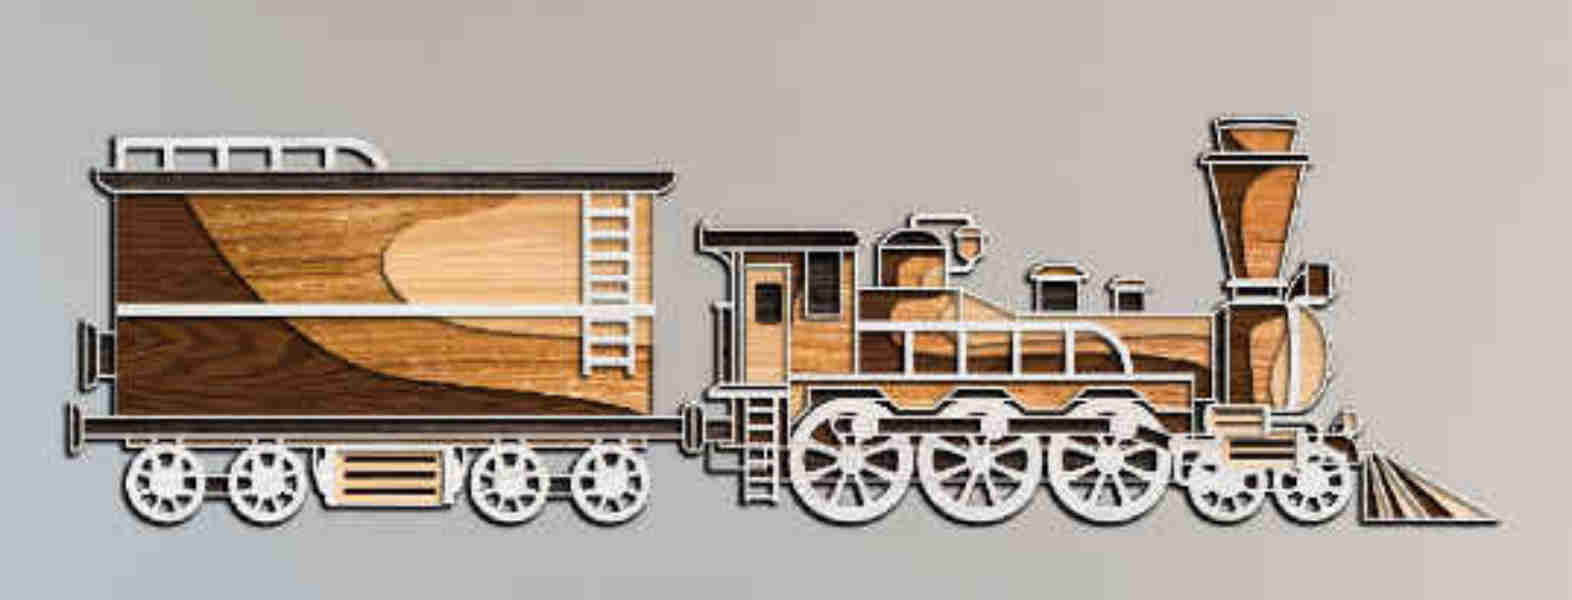 Classic Steam Engine with Carriage multilayer 3D Cut